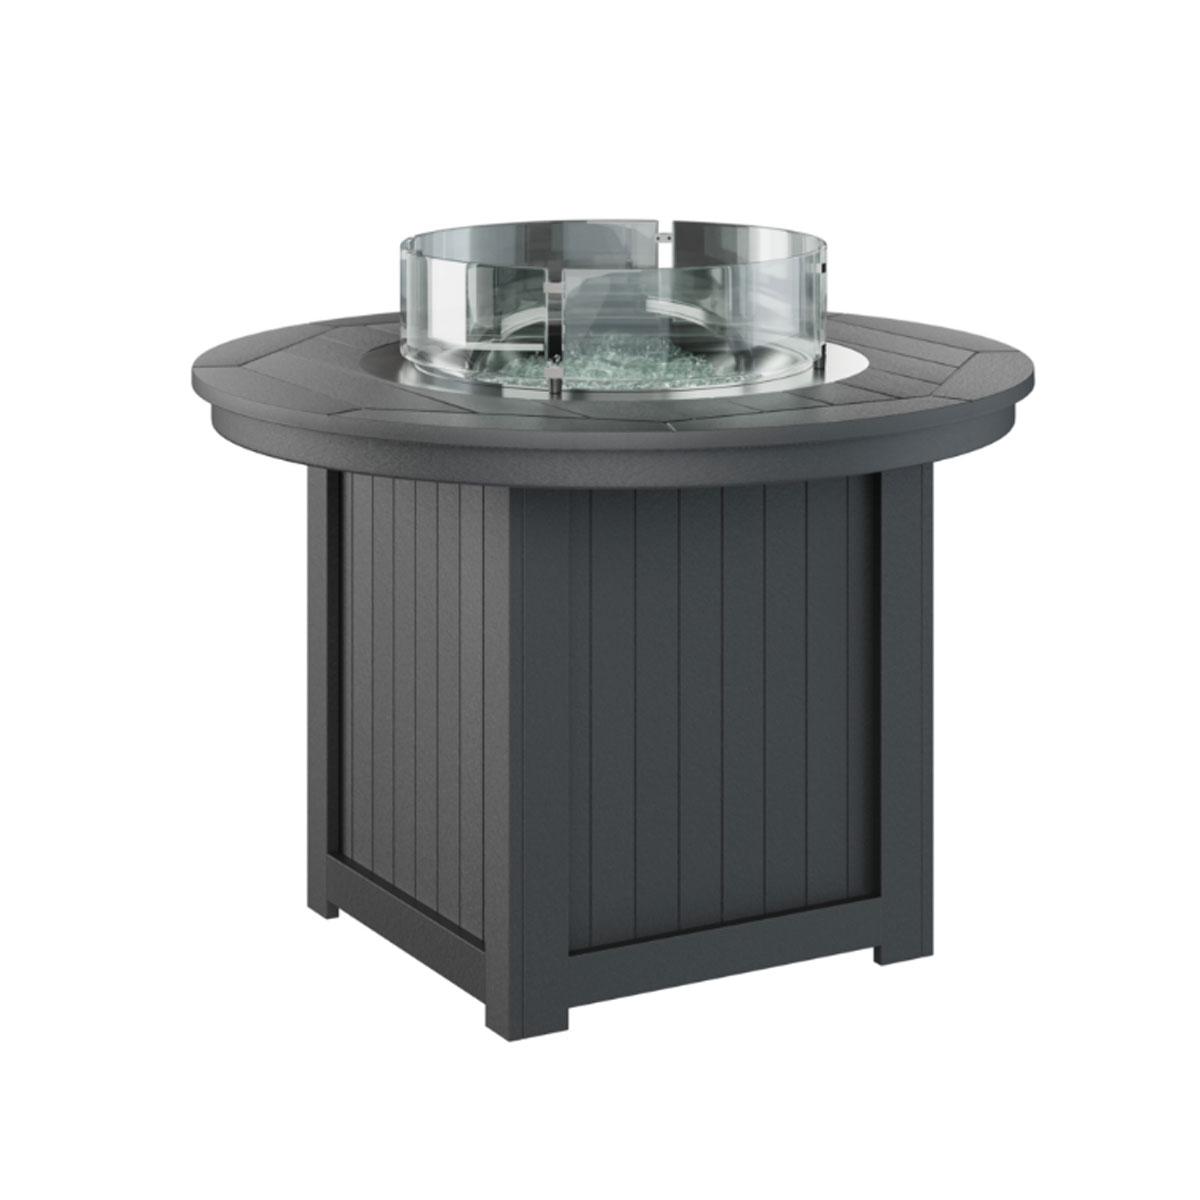 Donoma Poly-Top Fire Pit Dining Height